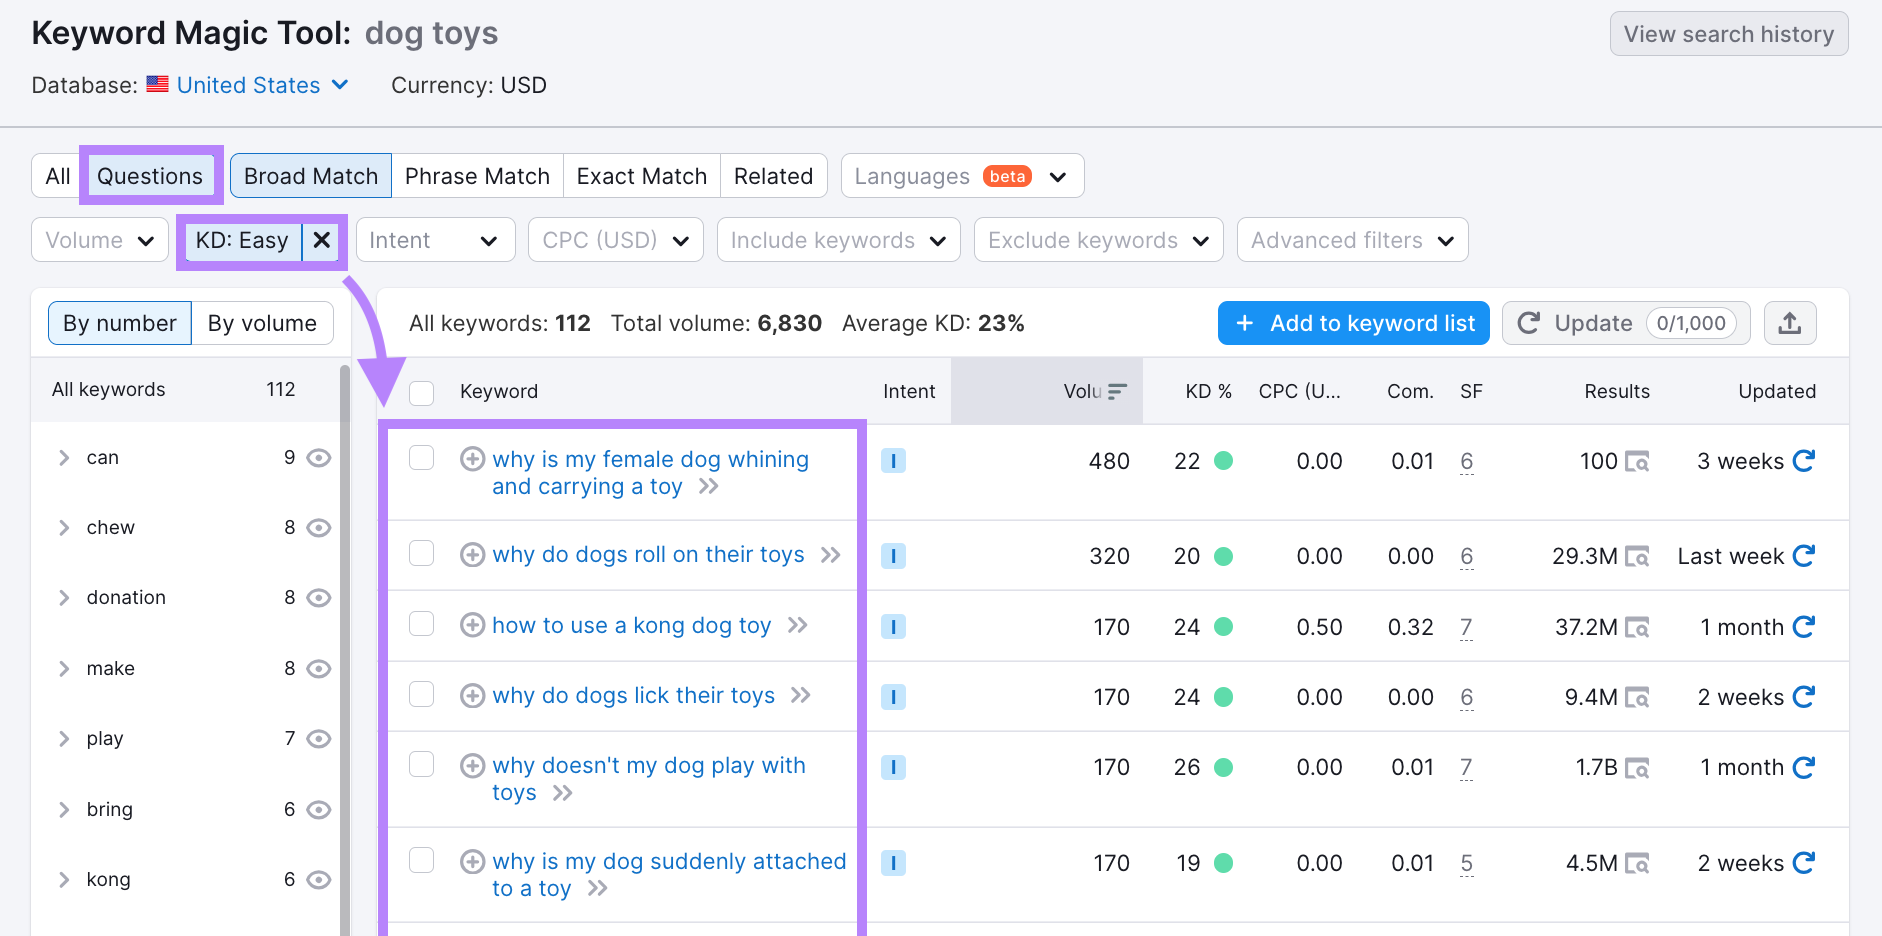 Keyword Magic Tool results filtered by "questions" and "KD-easy"